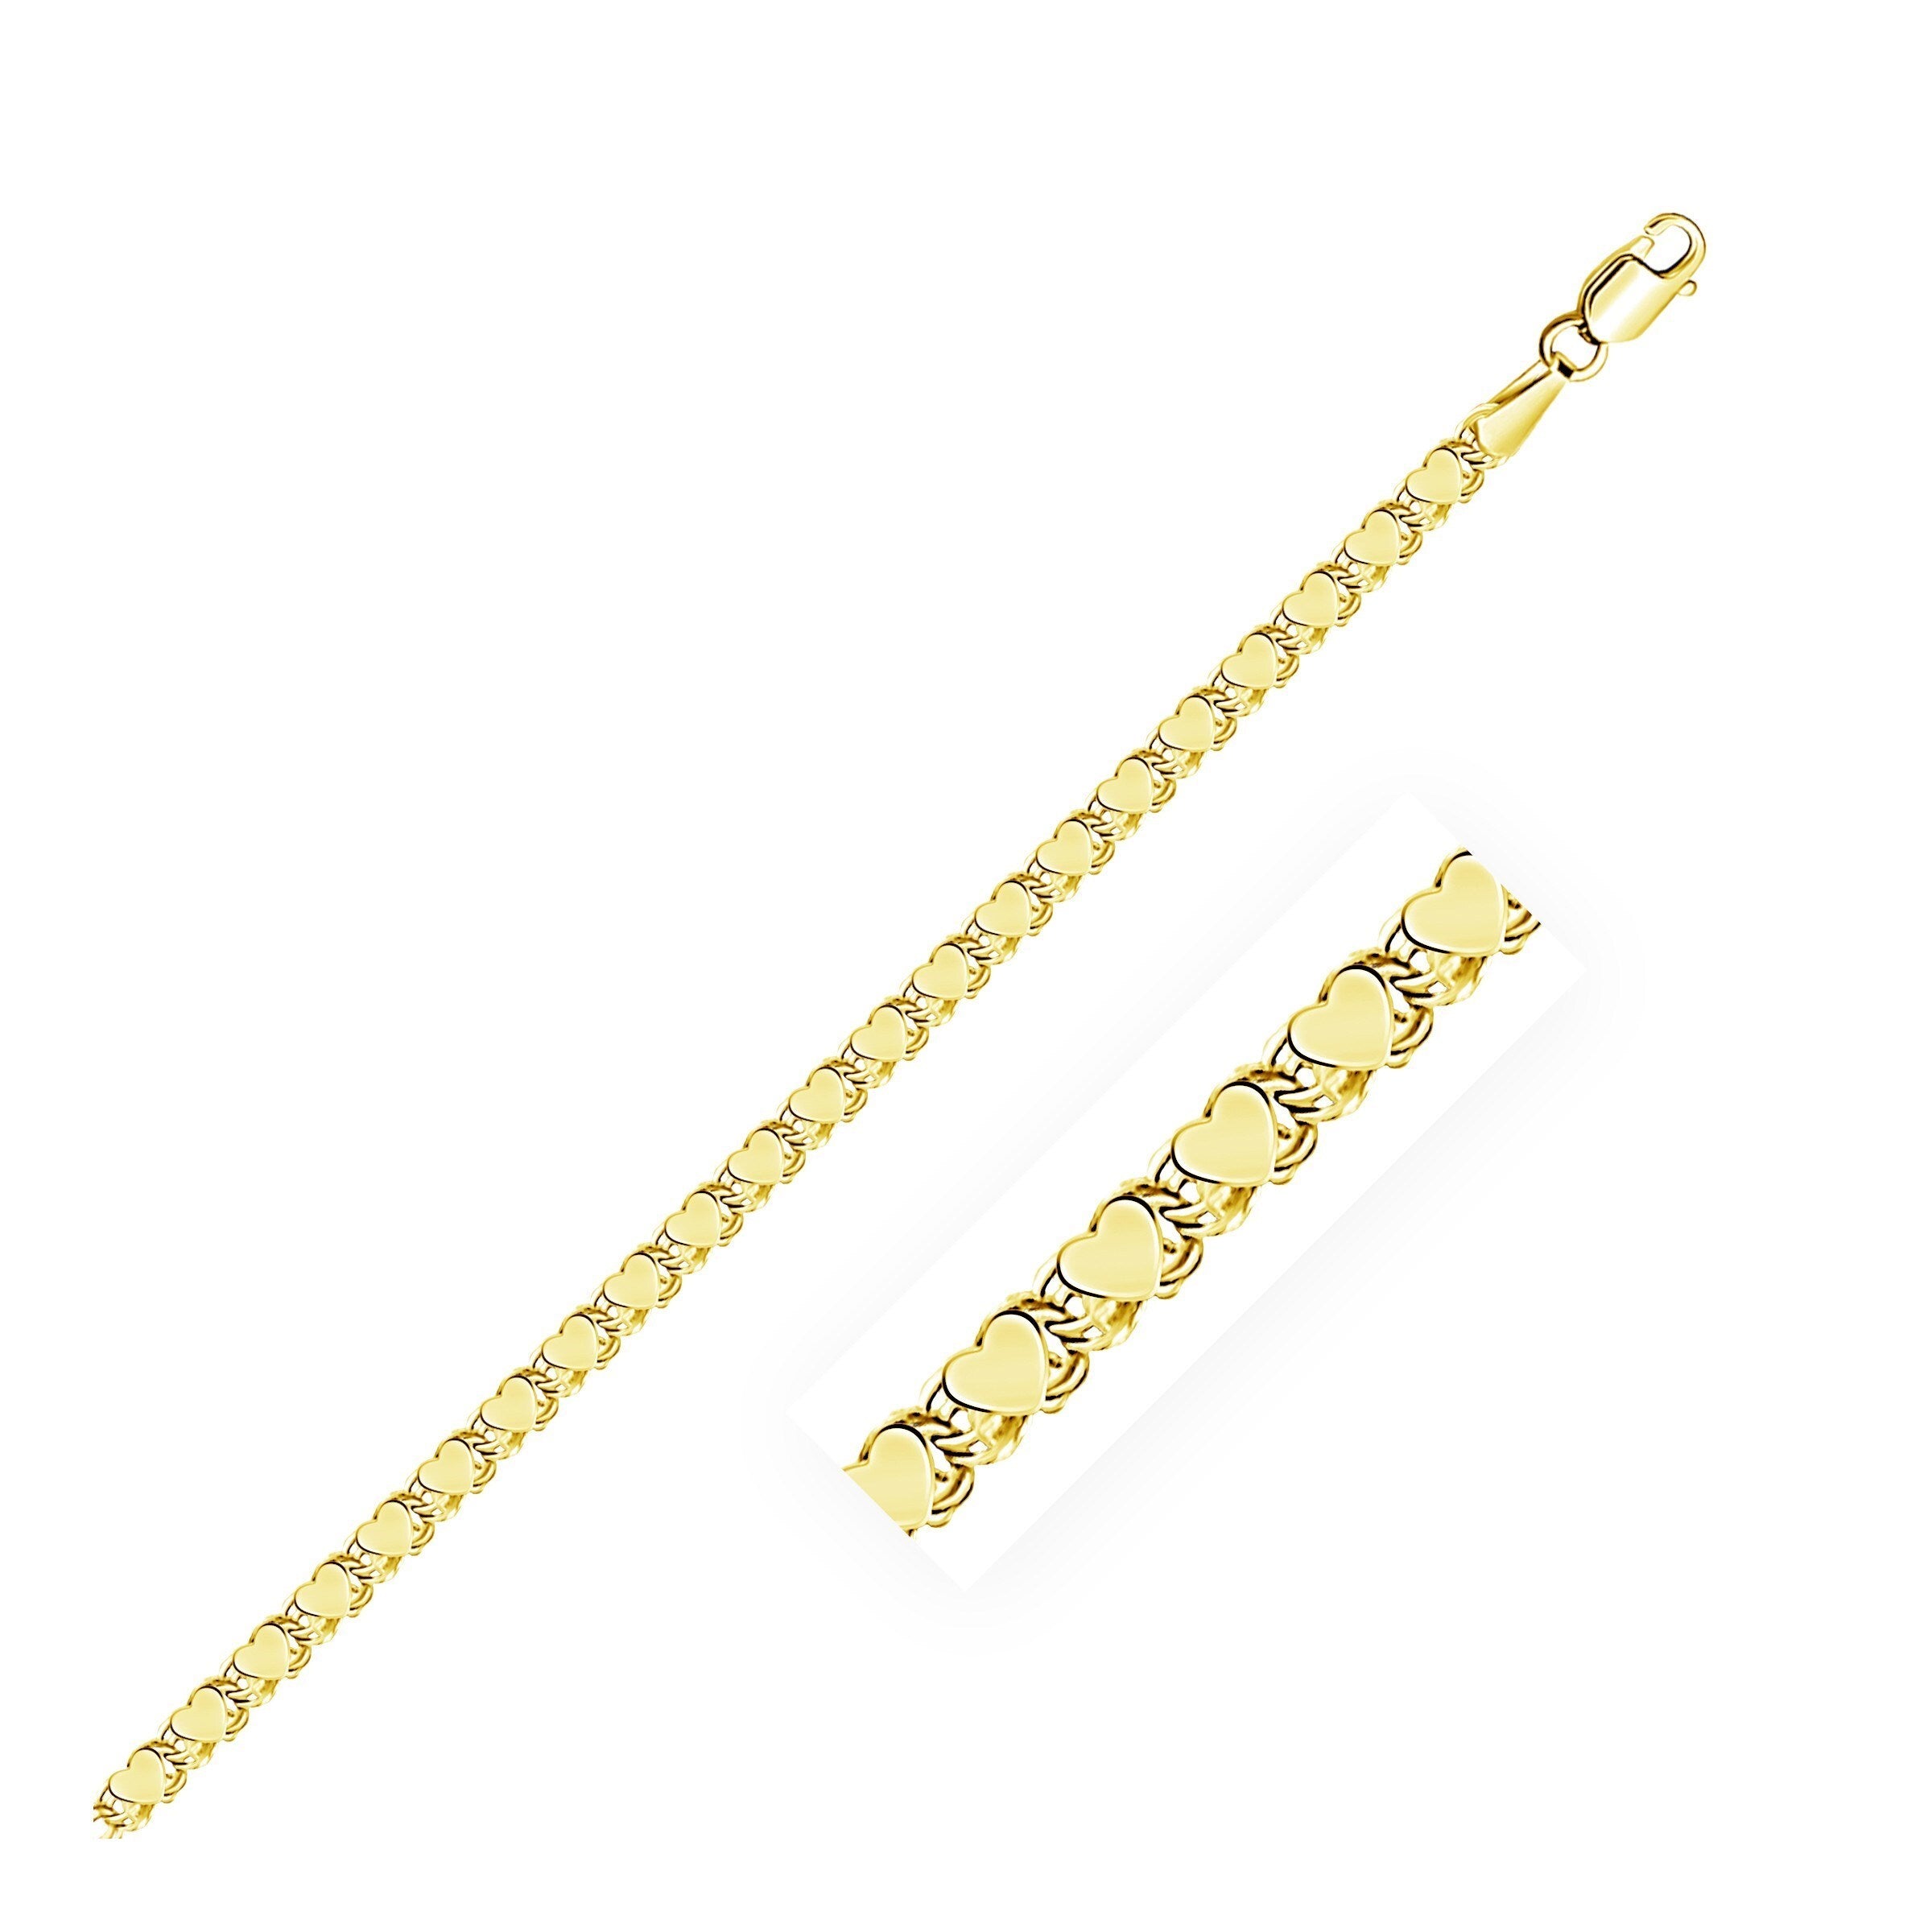 3.0mm 10k Yellow Gold Heart Anklet, size 10''